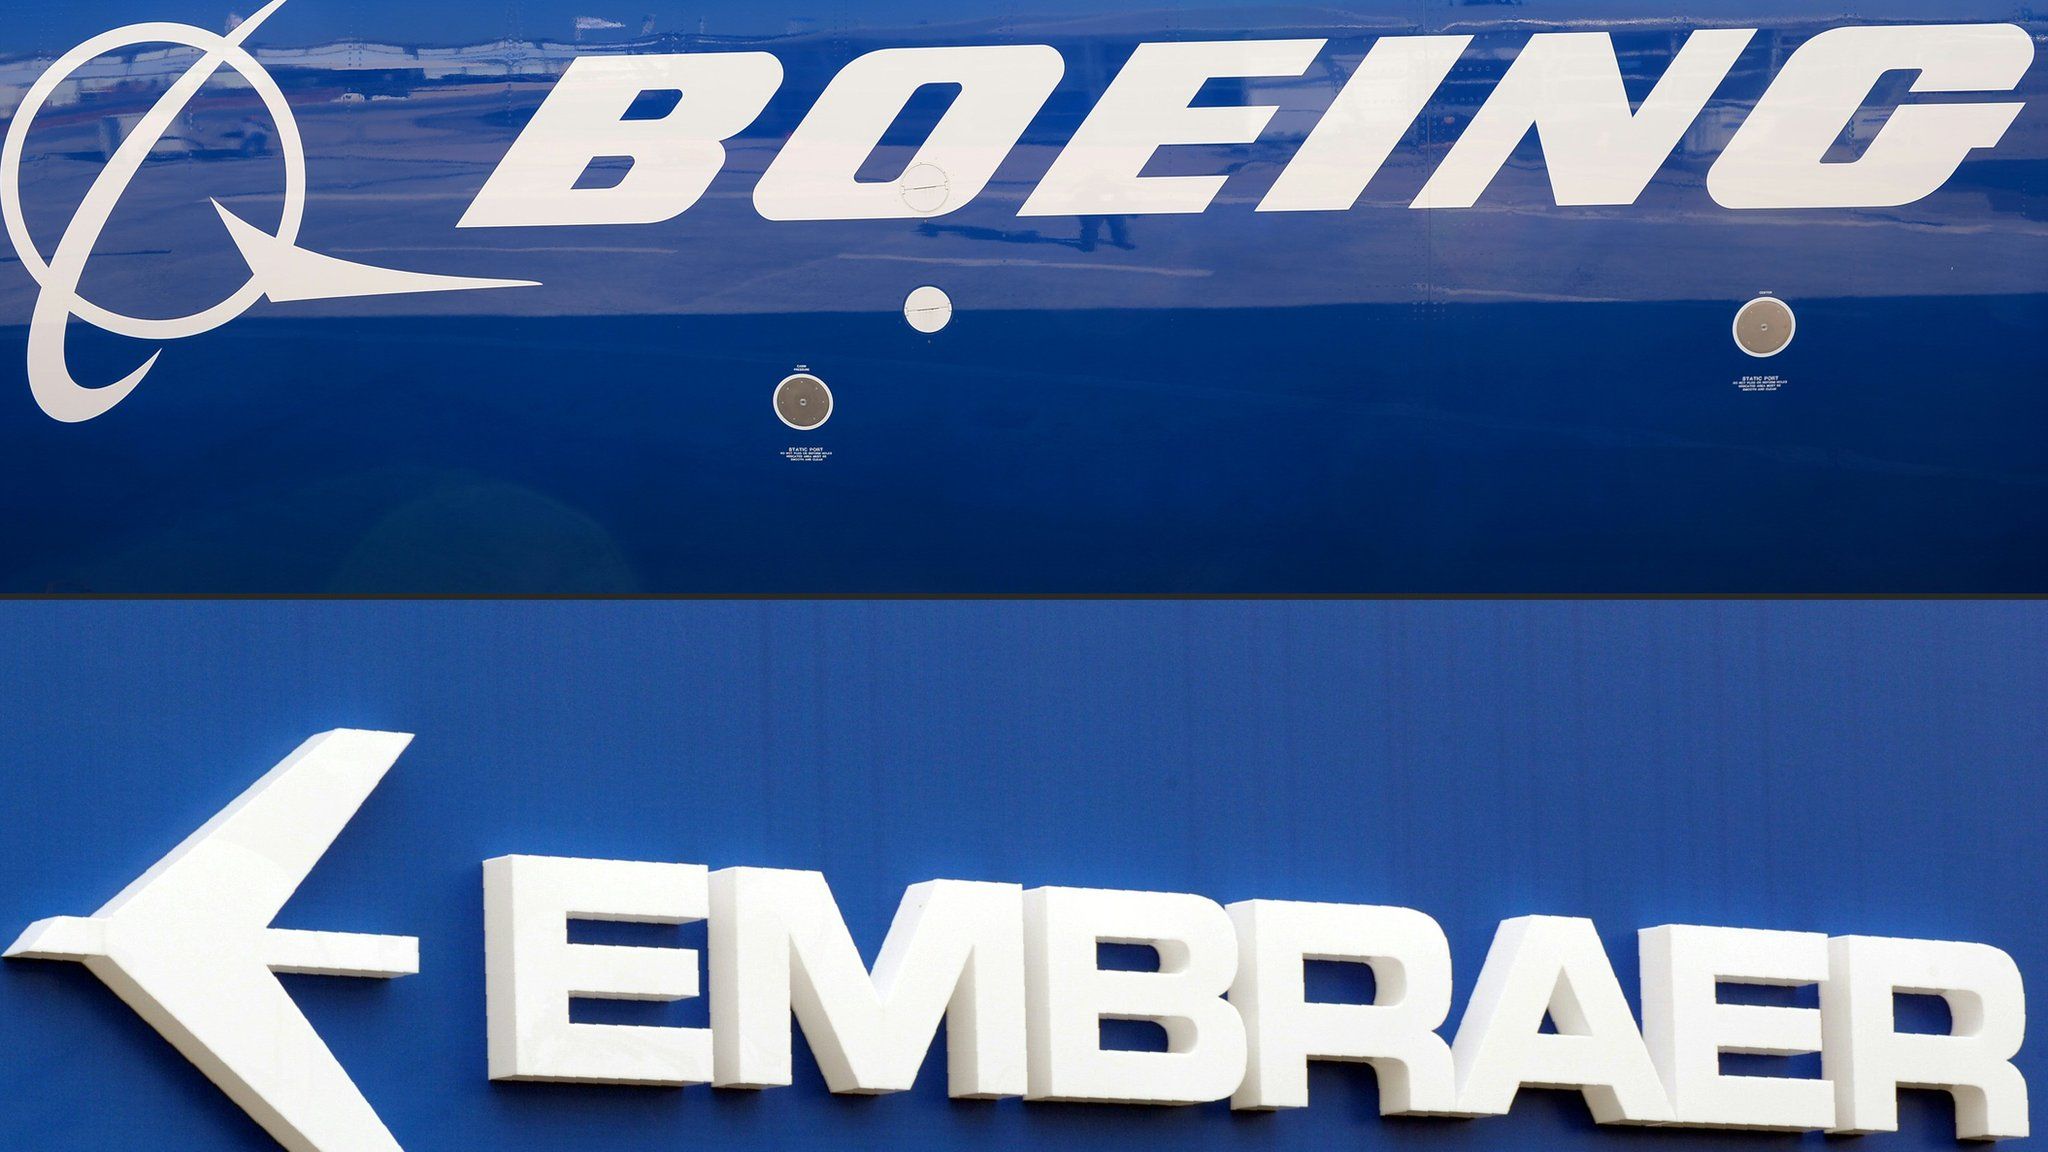 Embraer and Boeing logos